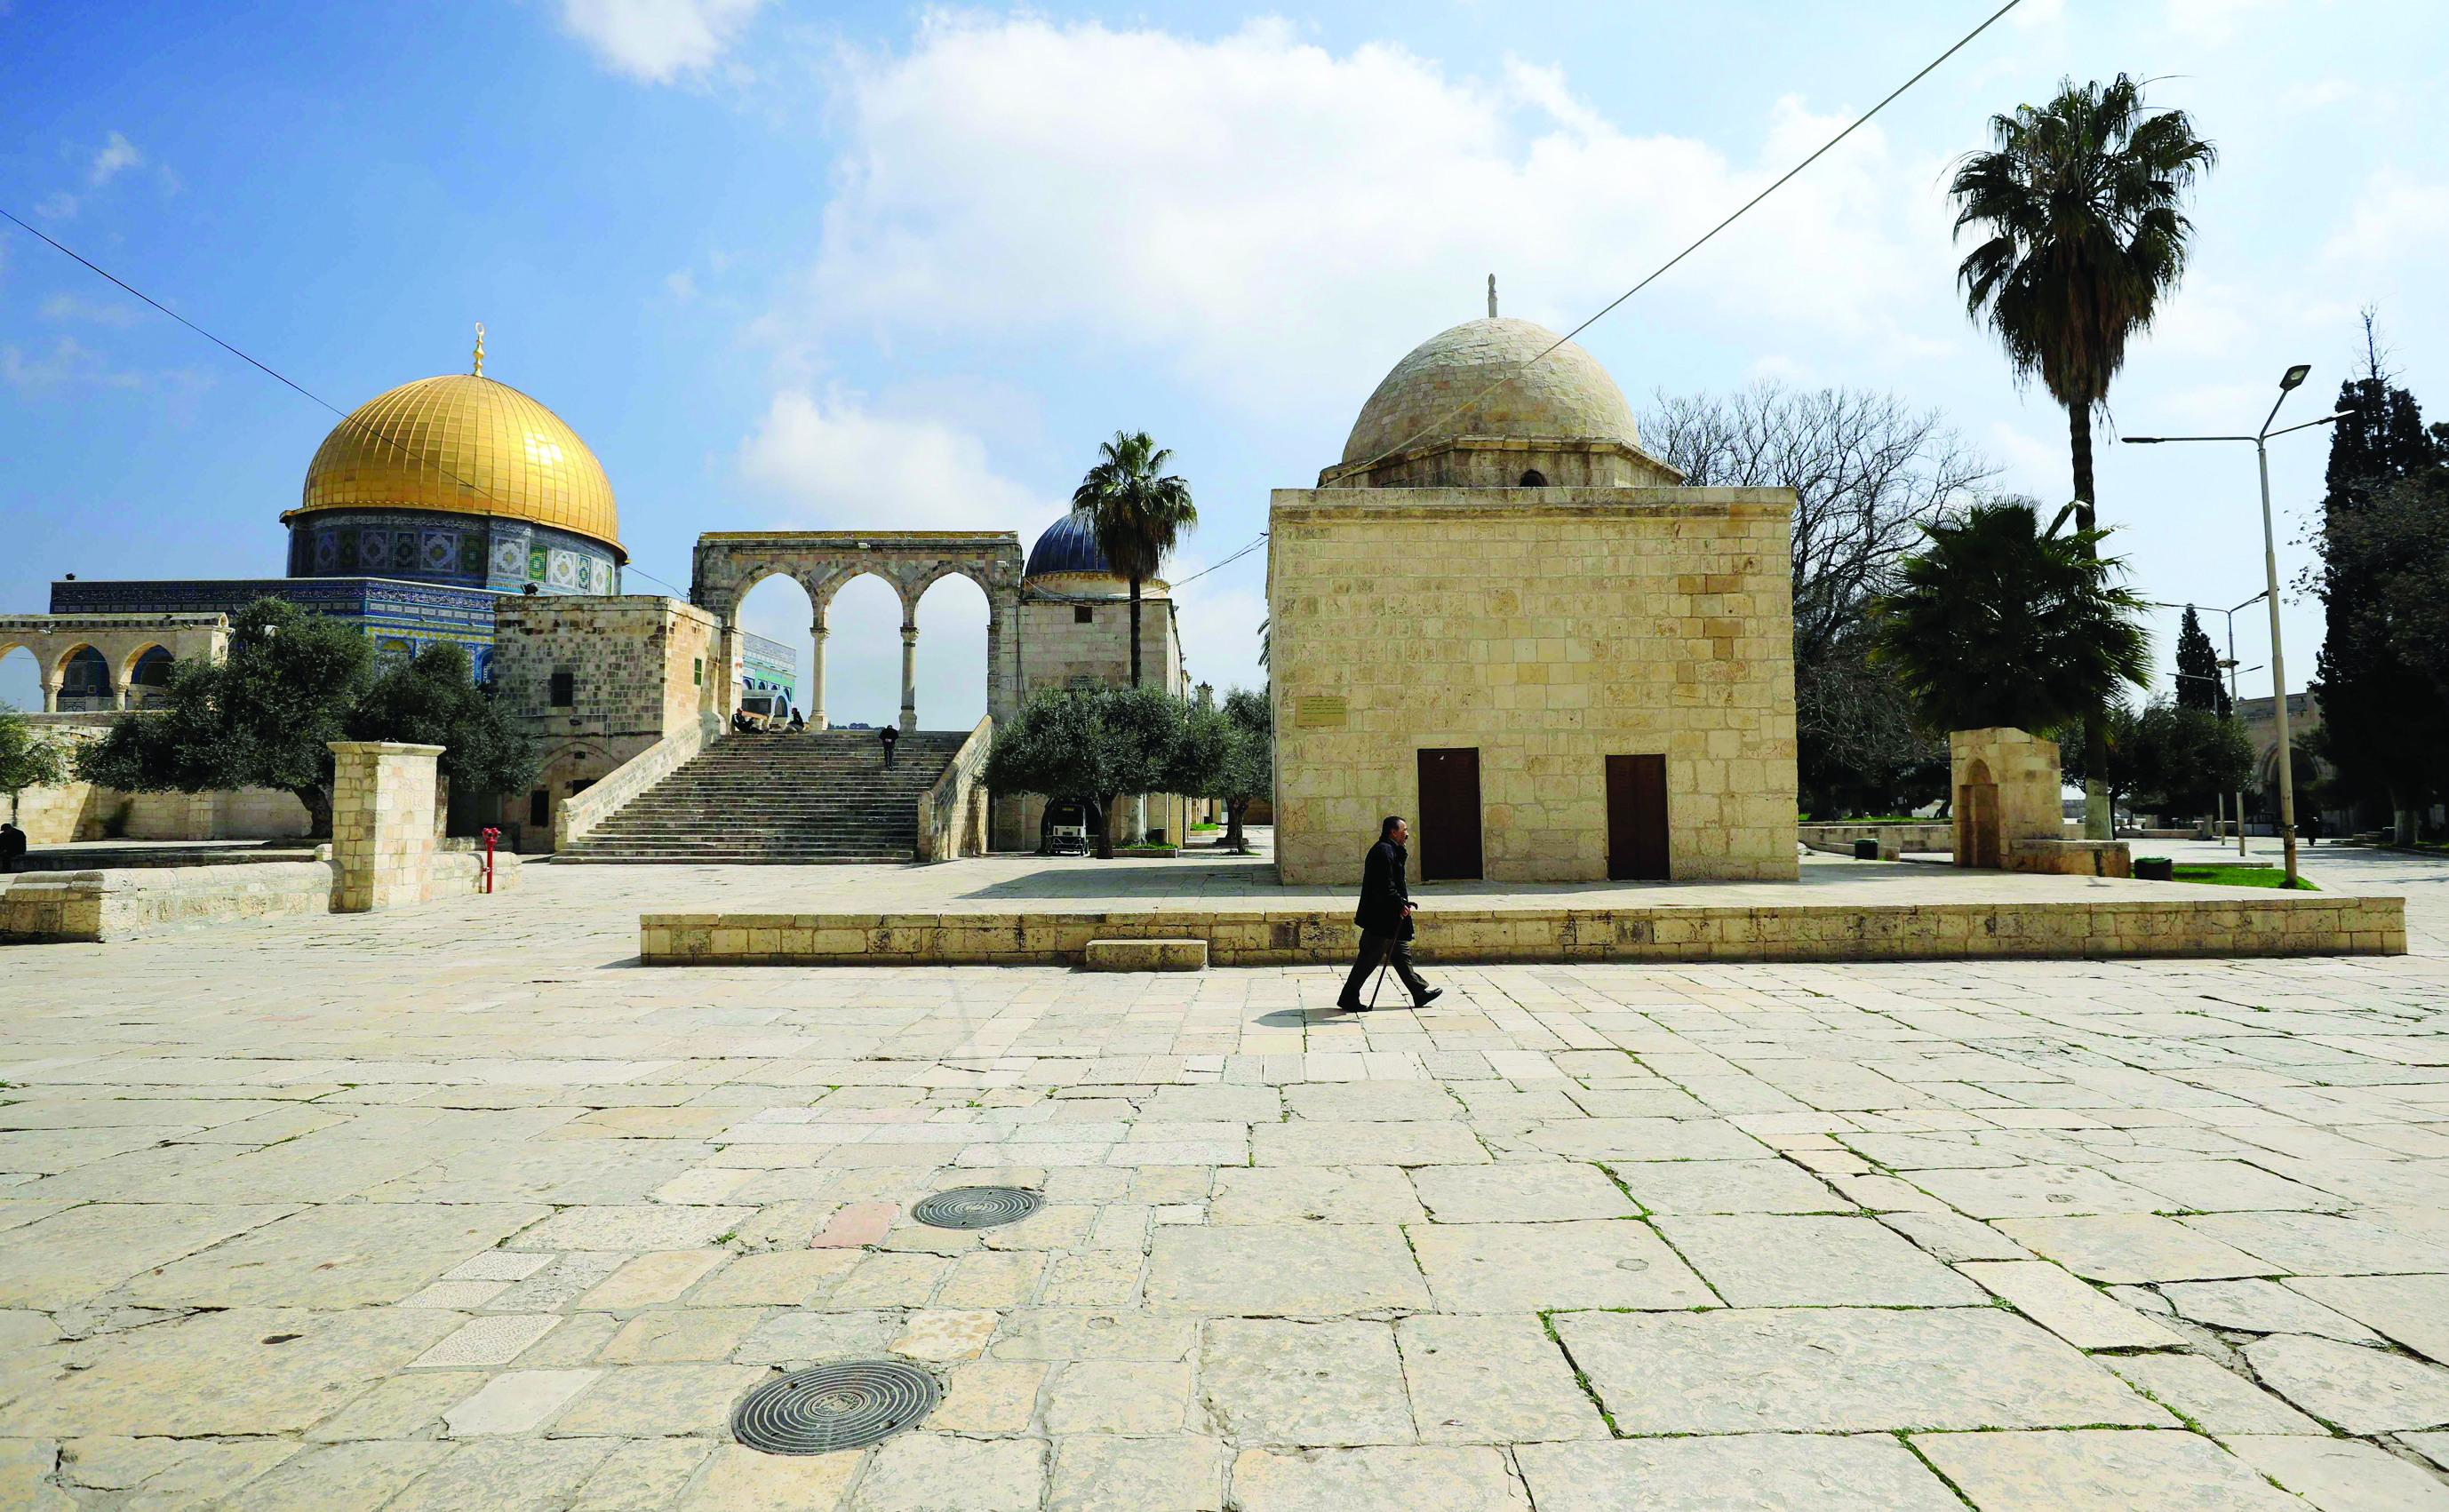 A man walks past the Dome of the Rock, at the al-Aqsa mosque compound, in the Old City of Jerusalem on March 16, 2020. - Israel imposed a two-week quarantine on all travellers entering the country, almost stopping tourism and limiting public gatherings in response to the COVID-19 coronavirus disease. (Photo by Emmanuel DUNAND / AFP)